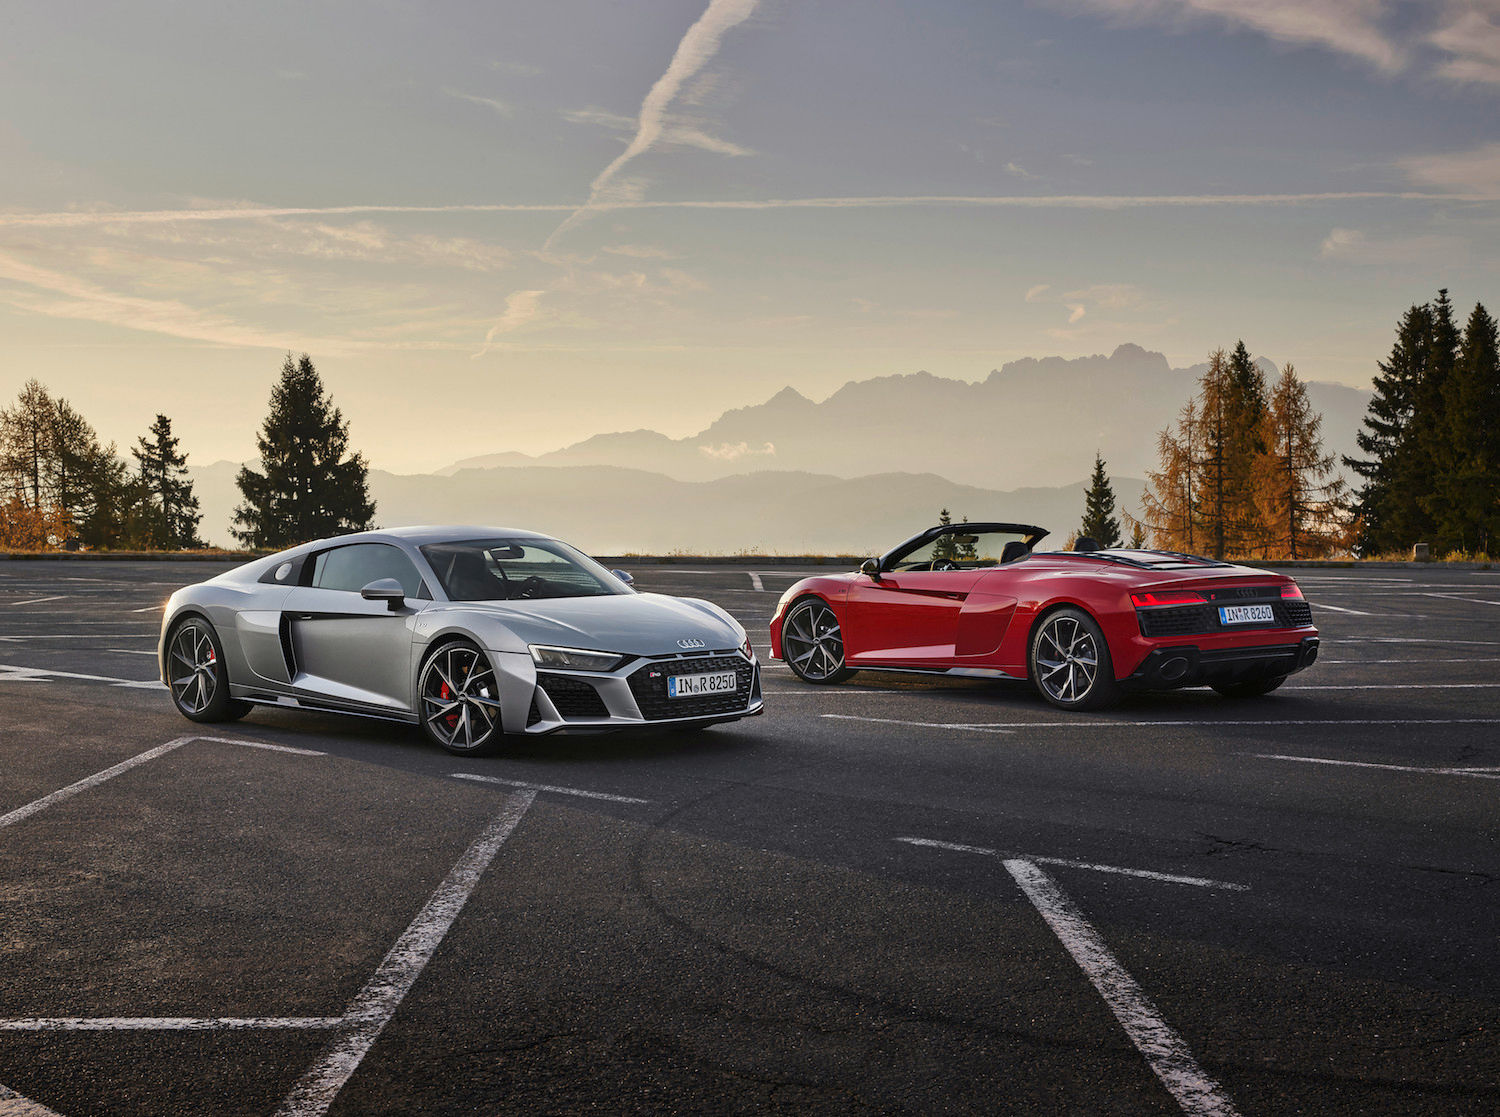 The rear-wheel drive Audi R8 is finally back, and this time it’s for good